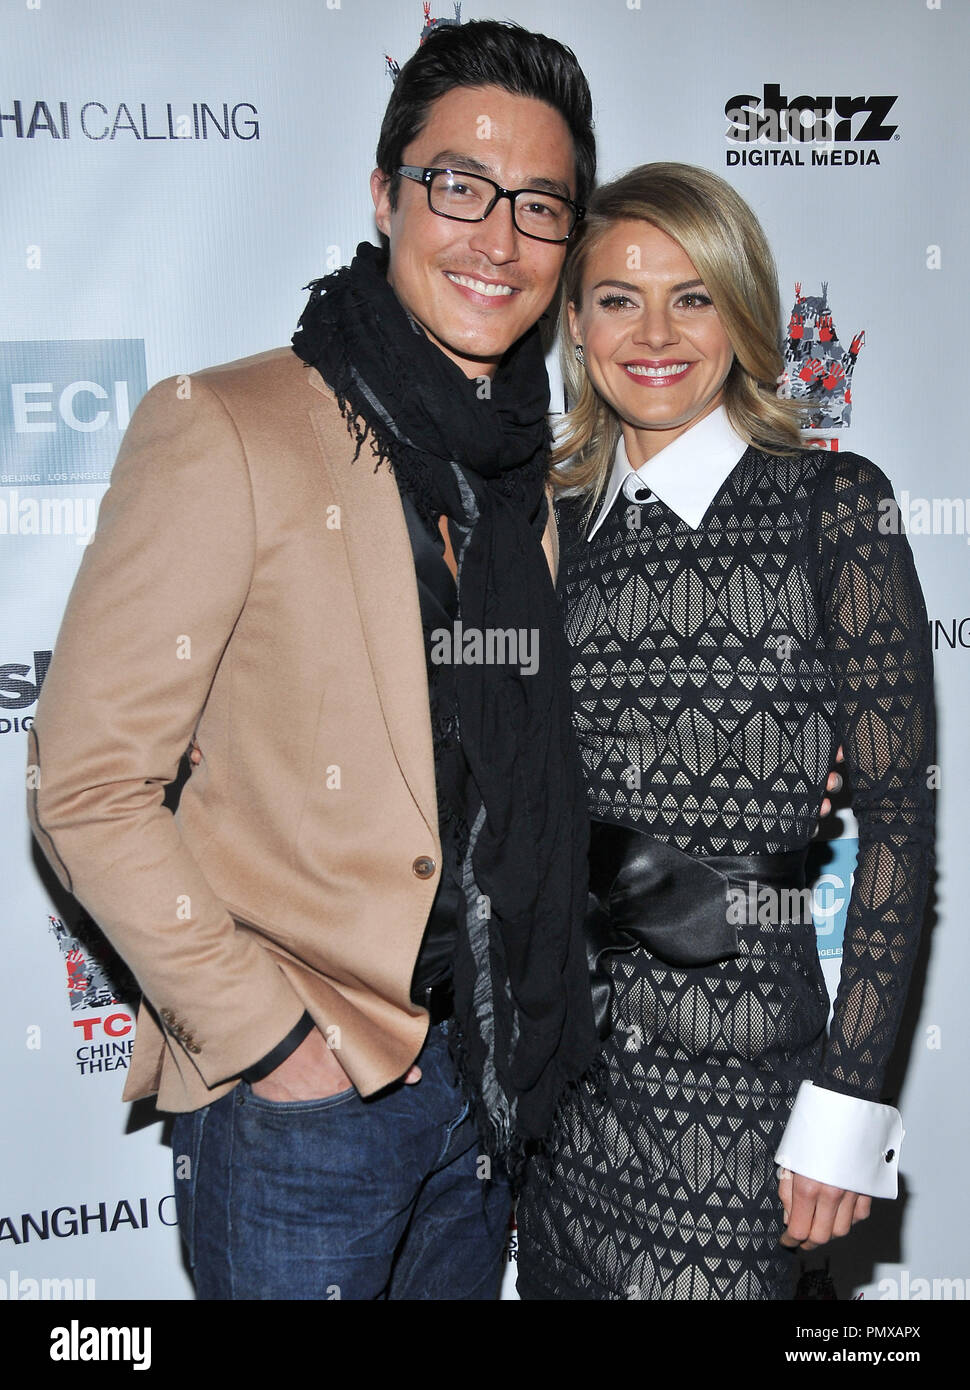 Daniel Henney & Eliza Coupe at the 'Shanghai Calling' Los Angeles Premiere held at the TCL Chinese Theatre in Hollywood, CA.The event took place on Monday, Febuary 12, 2013. PRPP / PictureLux Stock Photo